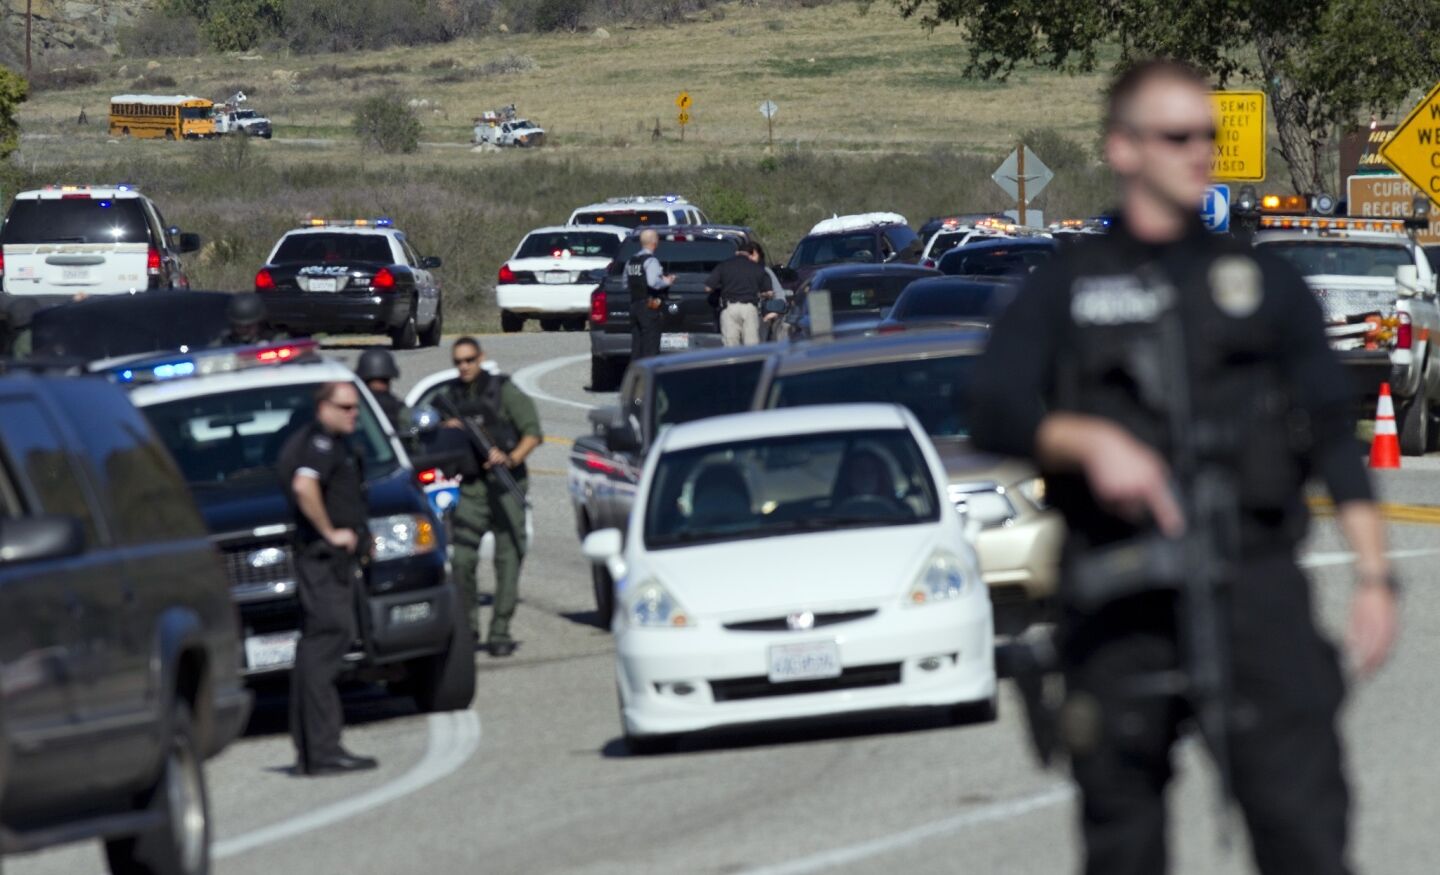 SWAT officers stand guard at a roadblock on Highway 38 north of Redlands as authorities search for former LAPD officer Christopher Dorner.